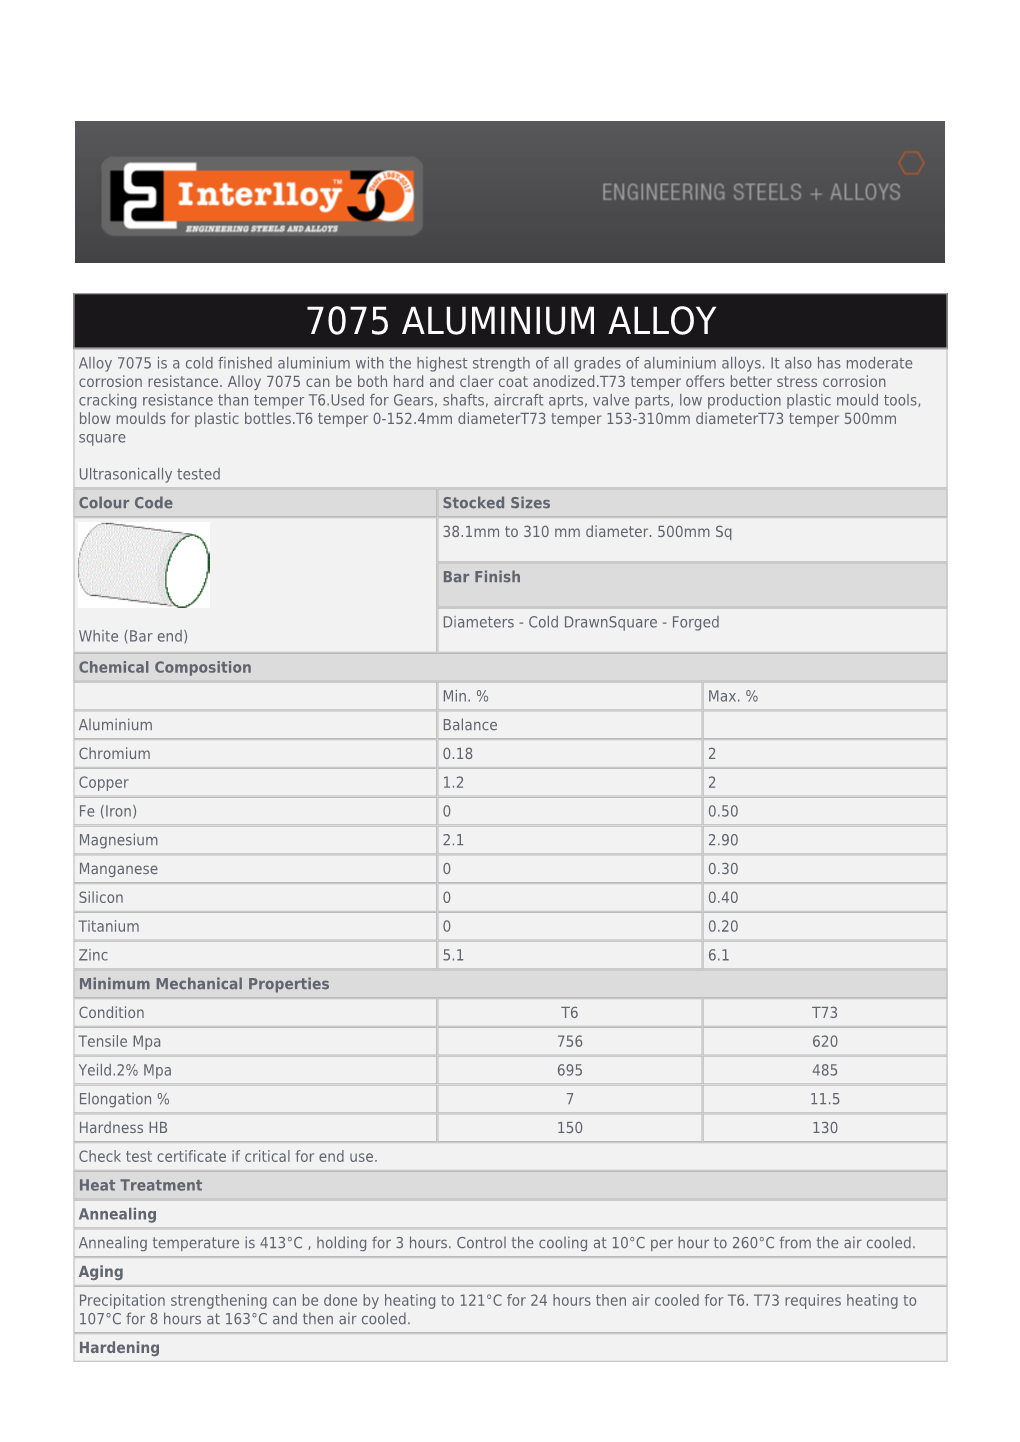 7075 ALUMINIUM ALLOY Alloy 7075 Is a Cold Finished Aluminium with the Highest Strength of All Grades of Aluminium Alloys